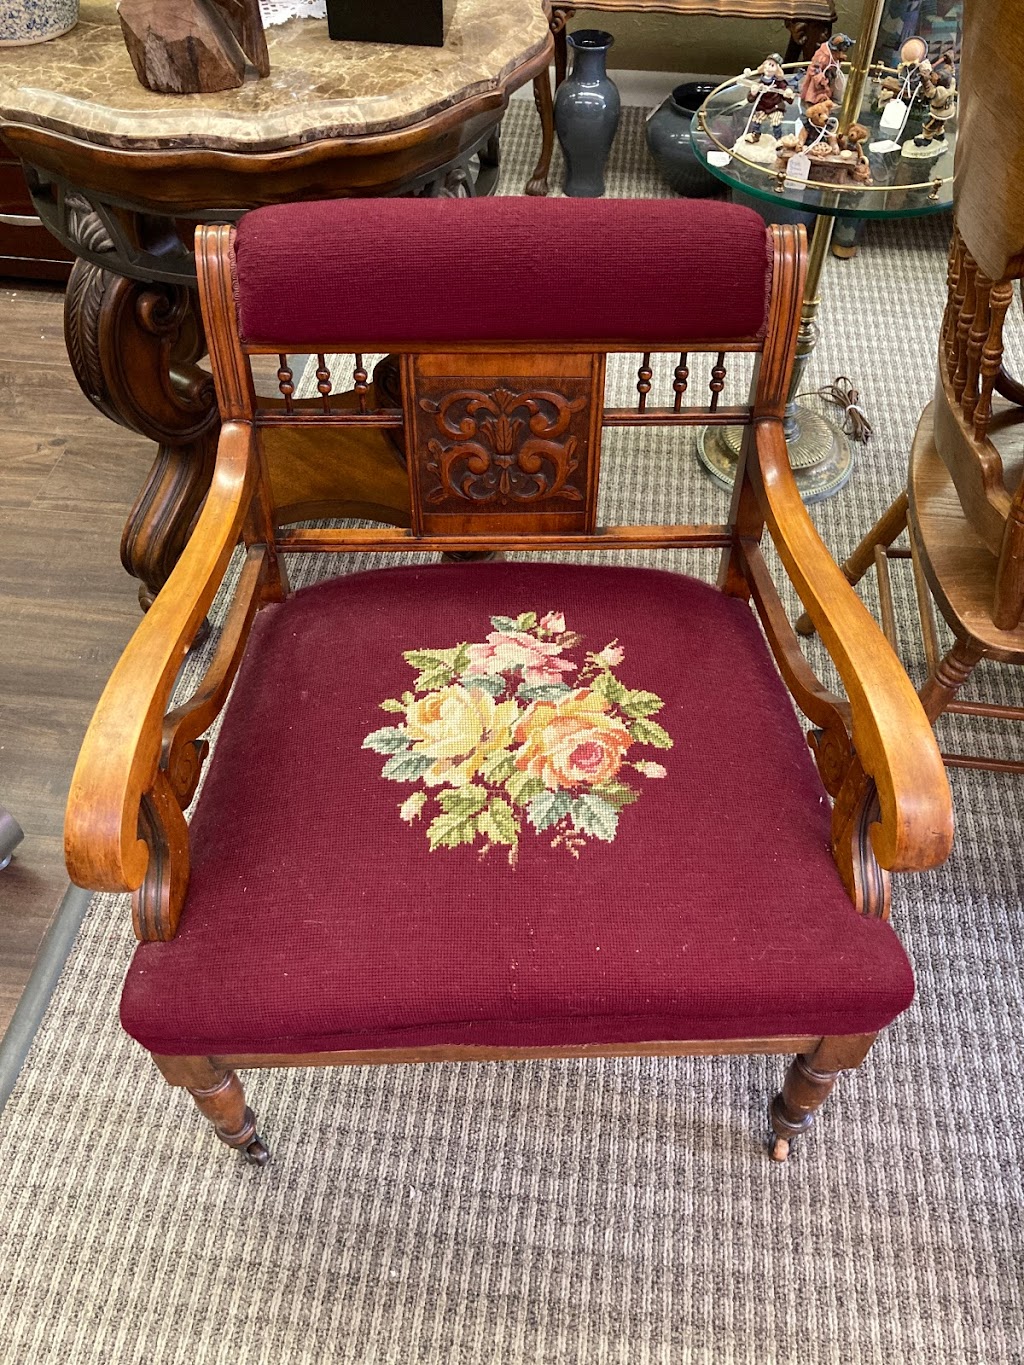 River City Consignments | 2229 Madison St, Bellevue, NE 68005 | Phone: (402) 885-8950